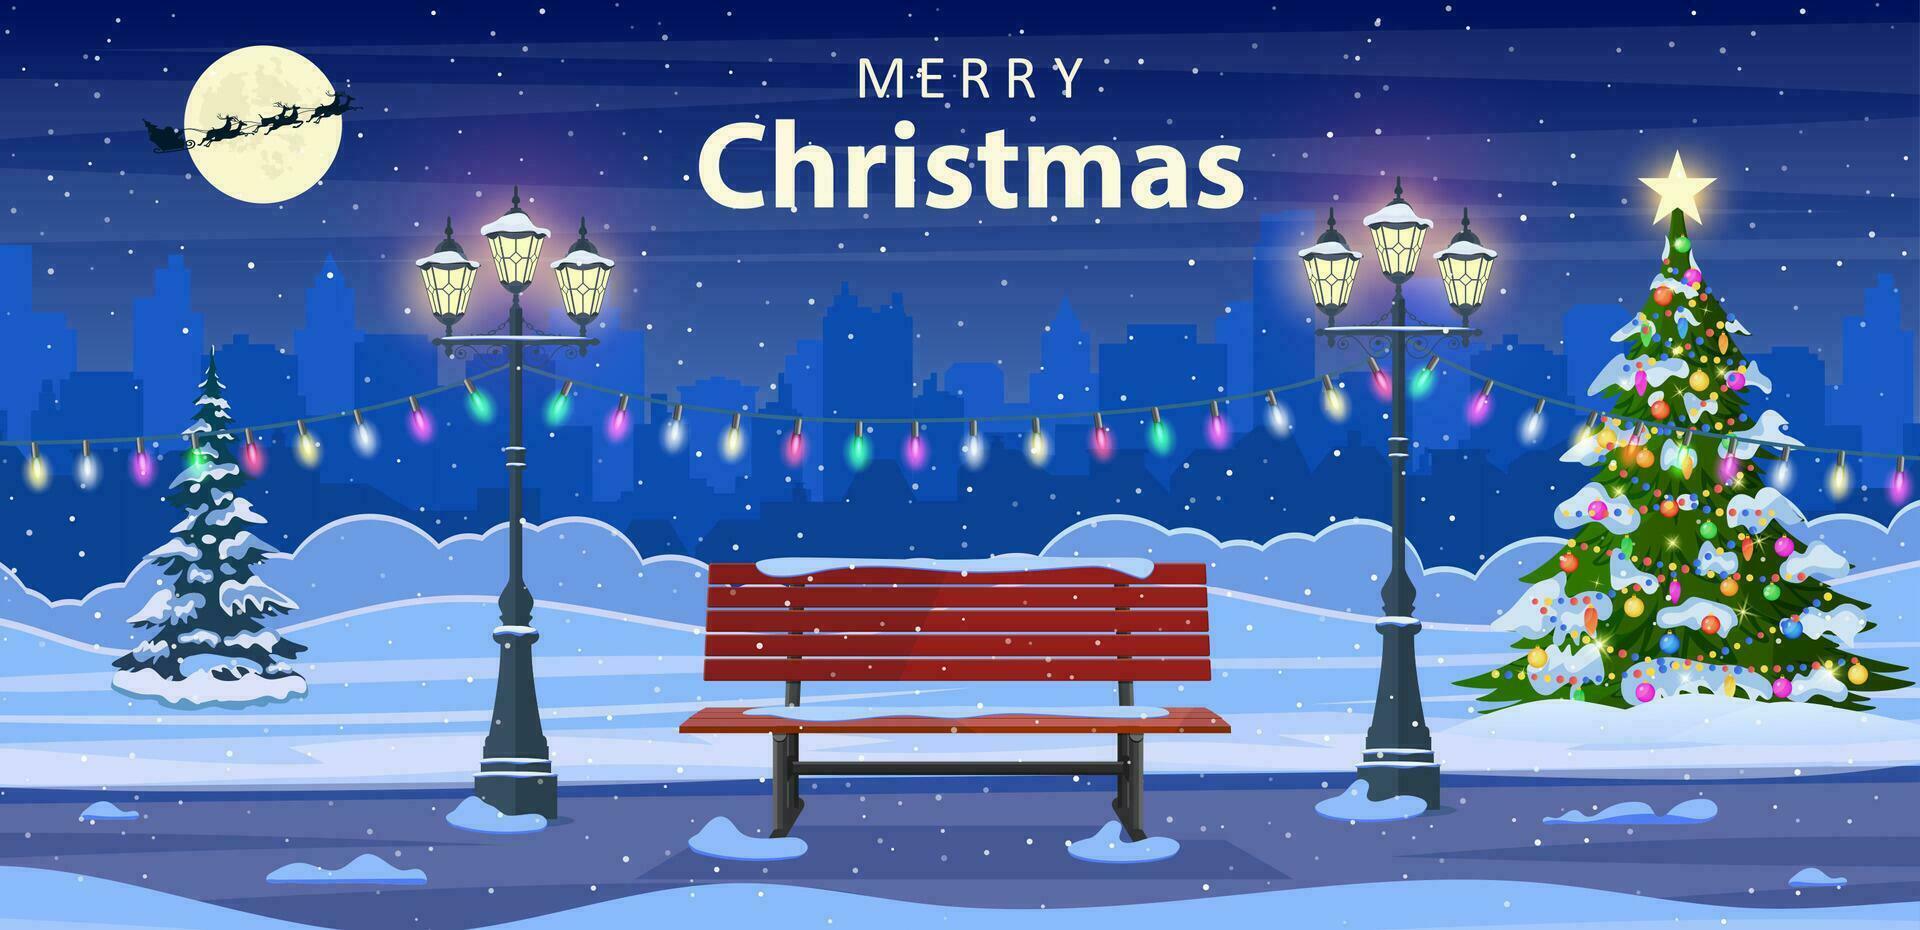 Cartoon Christmas in night city park, empty public garden with decorated fir-trees, bench and lighting garlands. Winter cityview landscape, vector